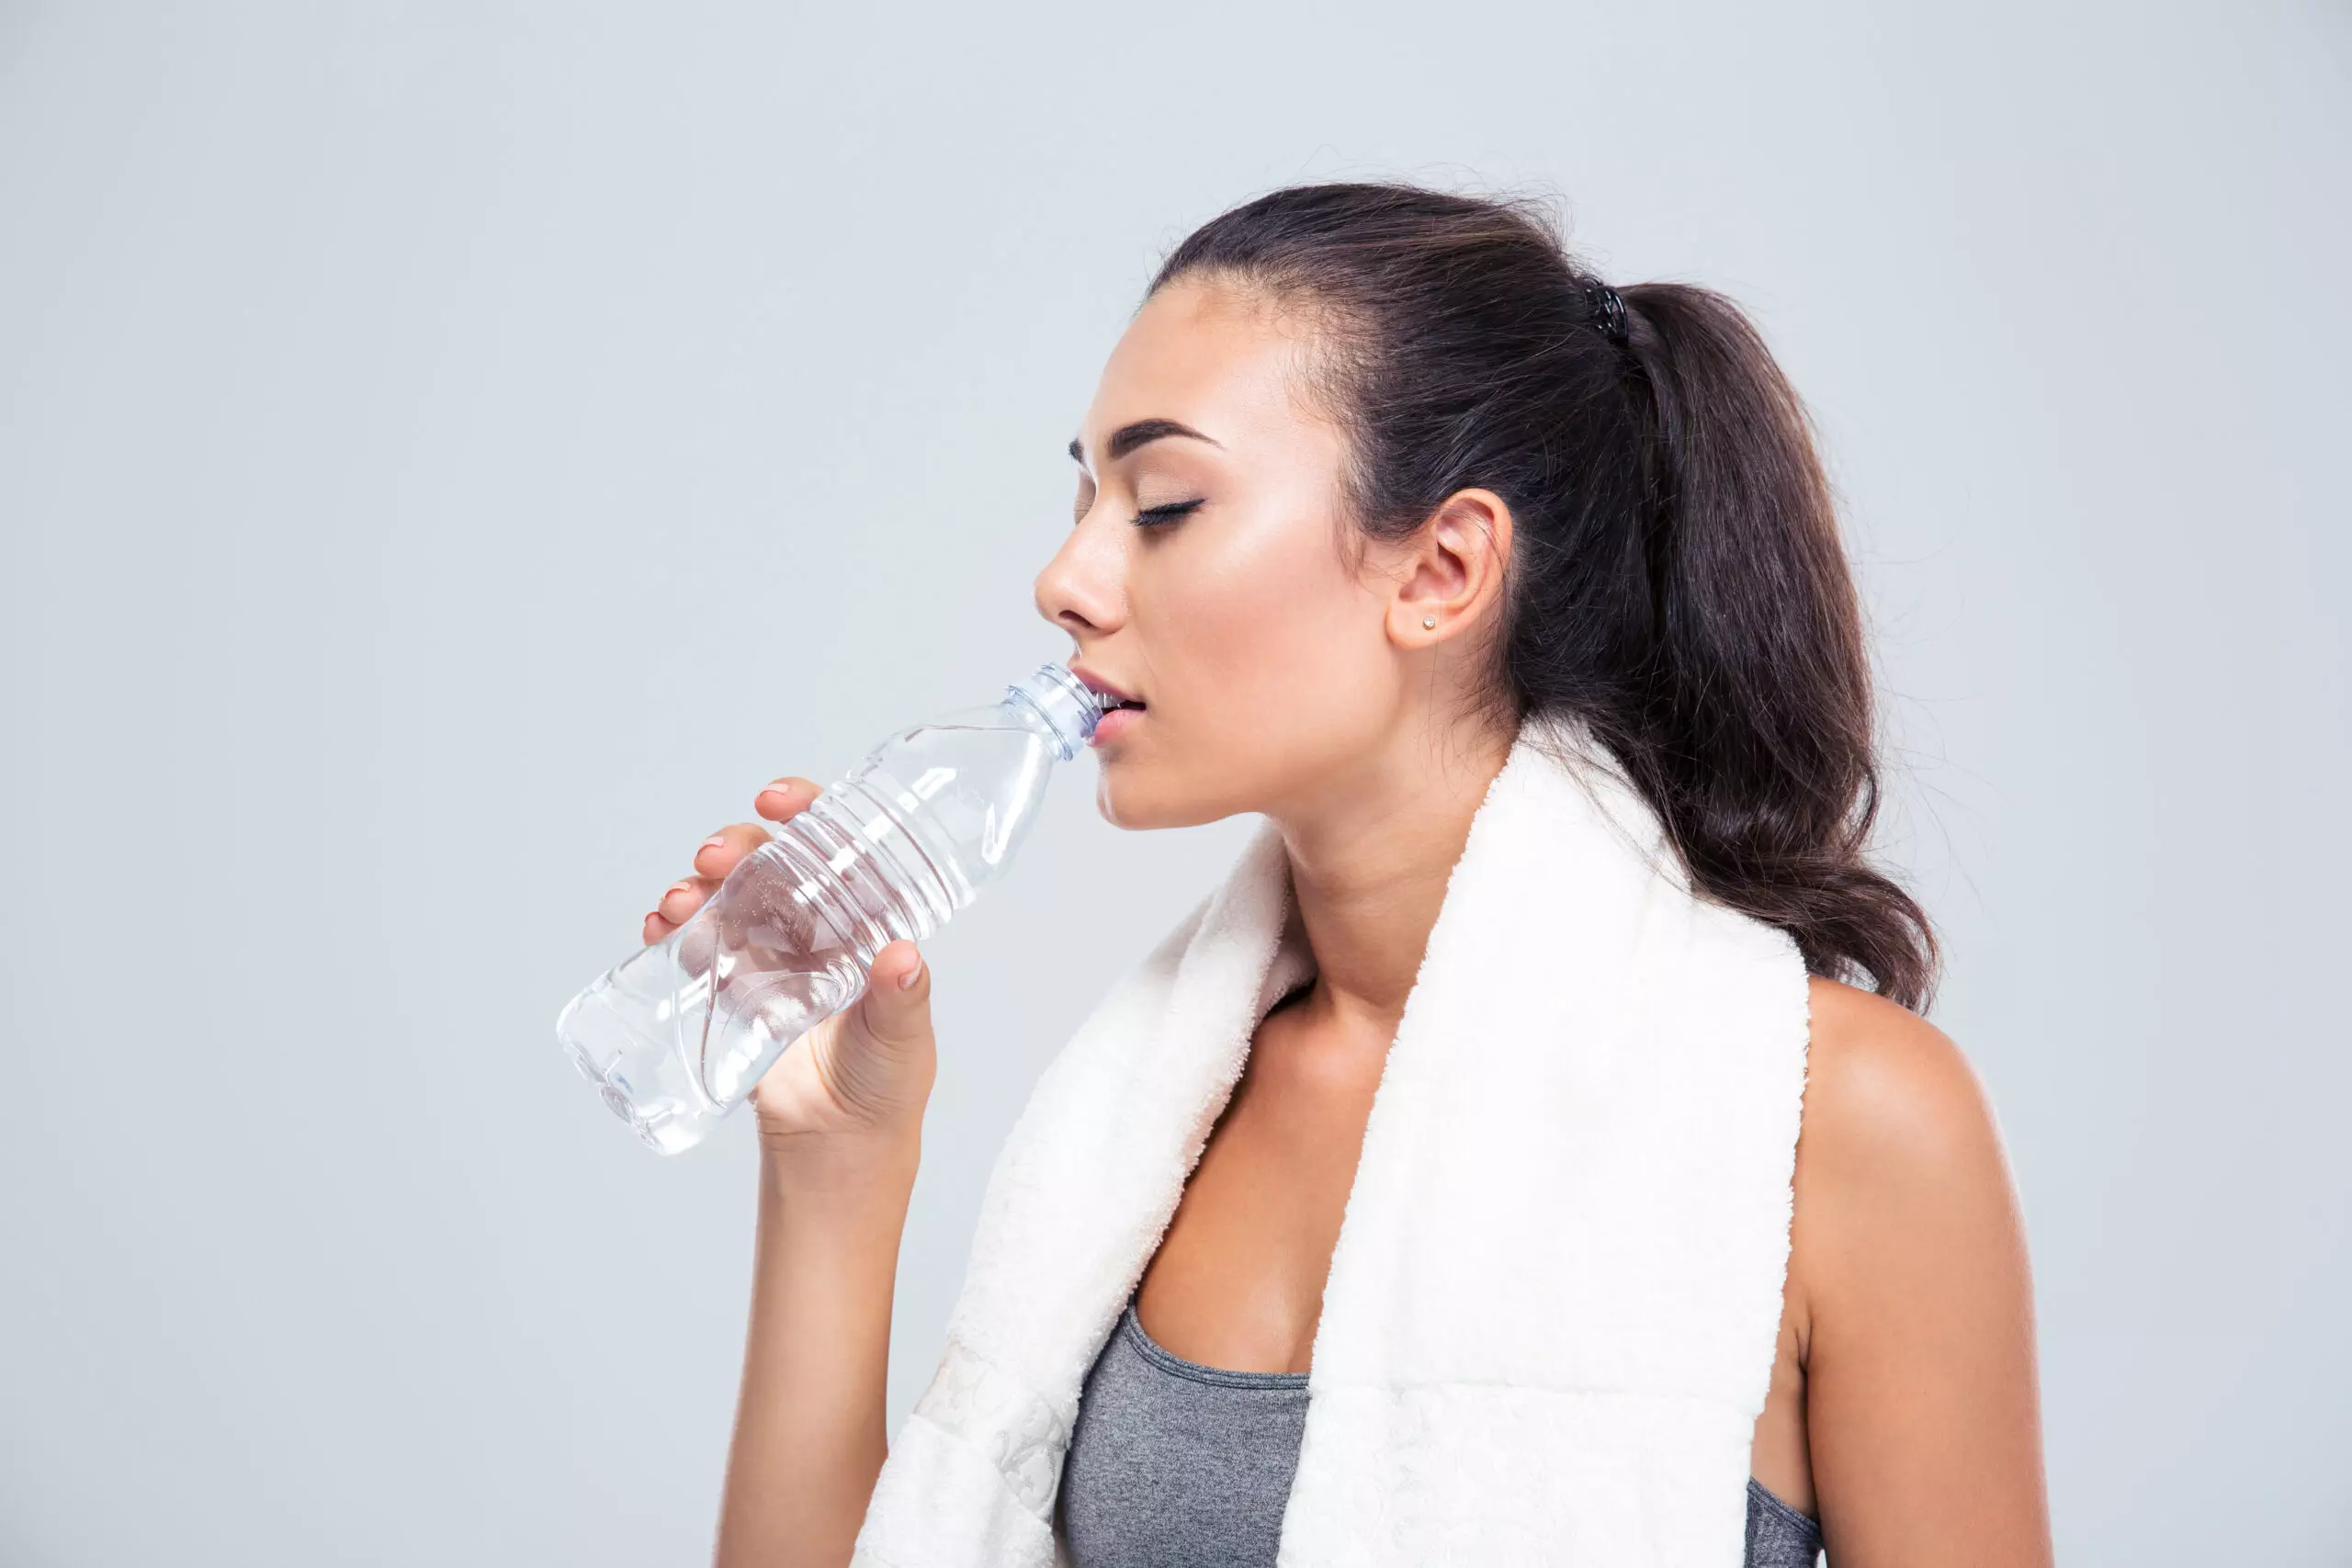 Woman drinking water after workout.